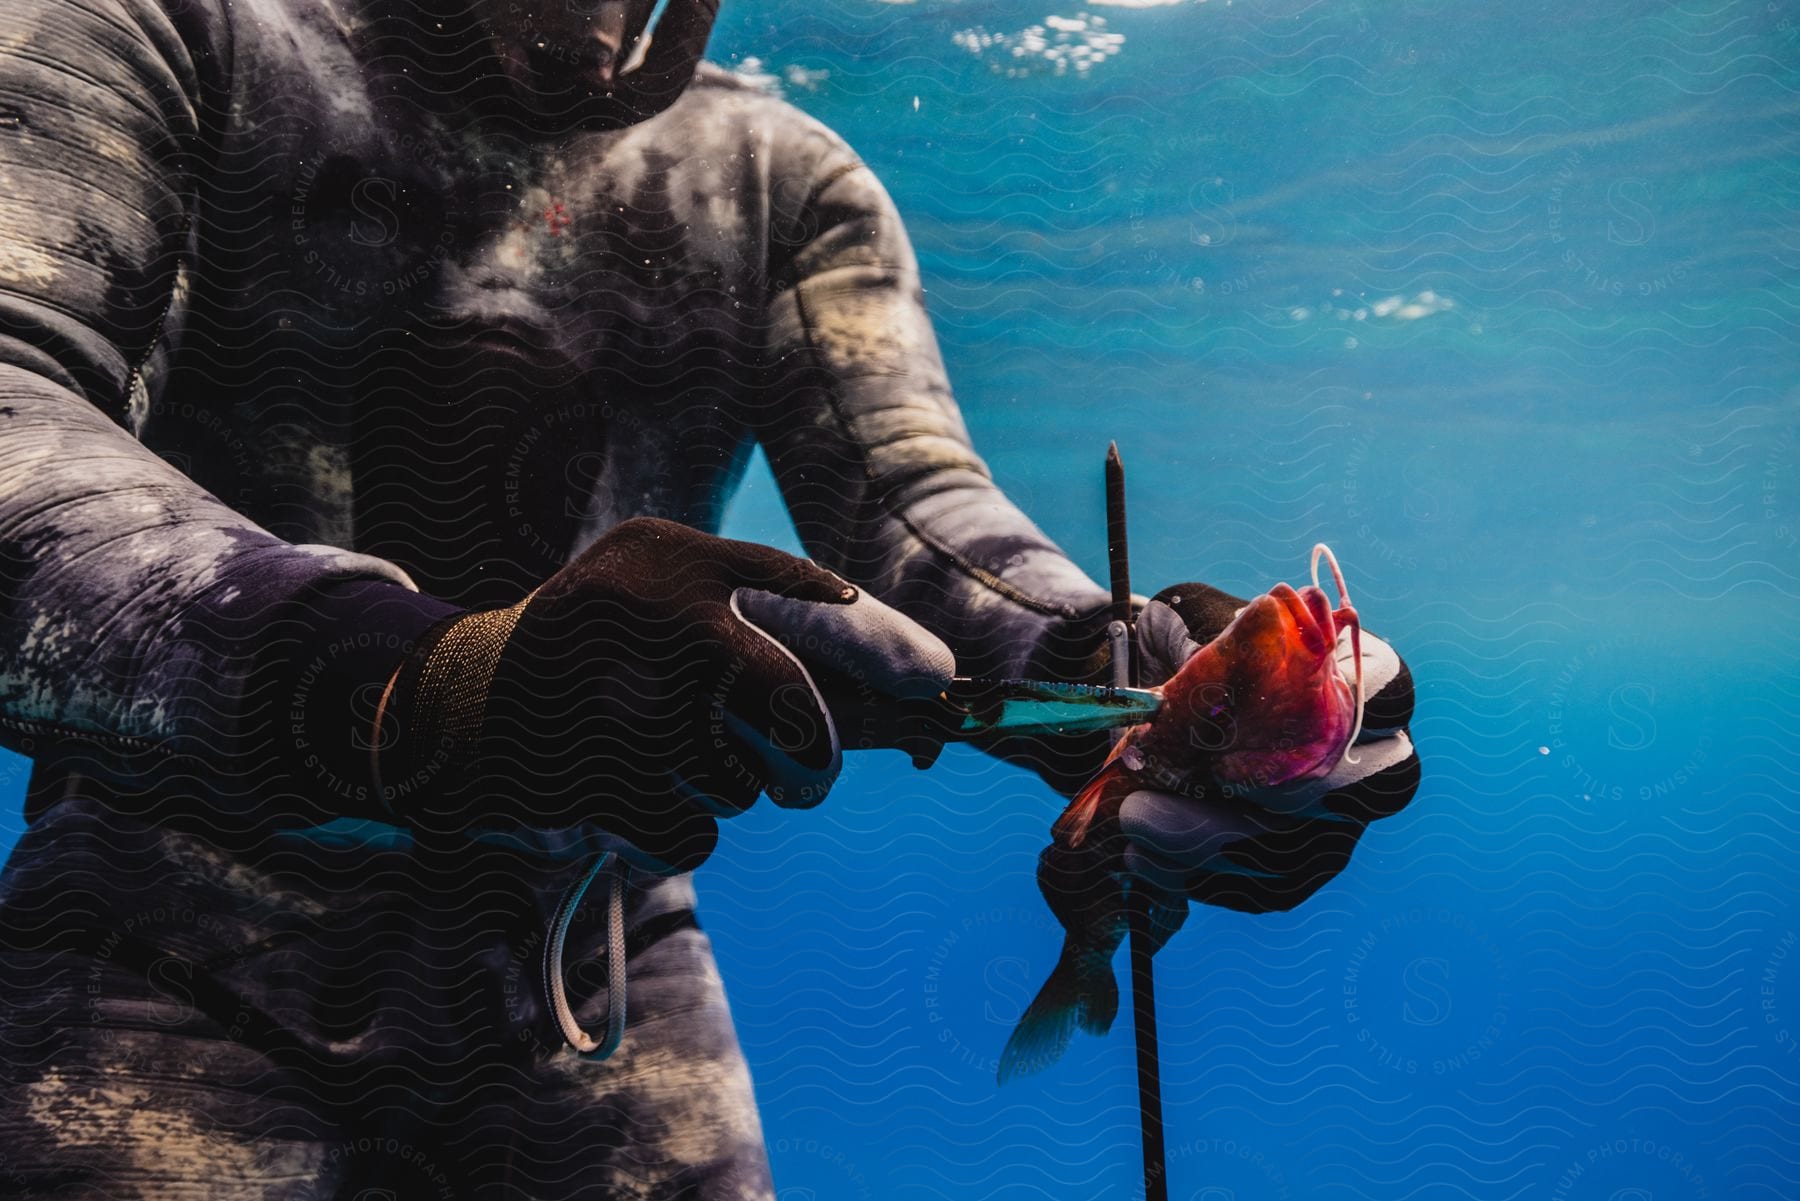 A man is underwater cutting a fish with a knife